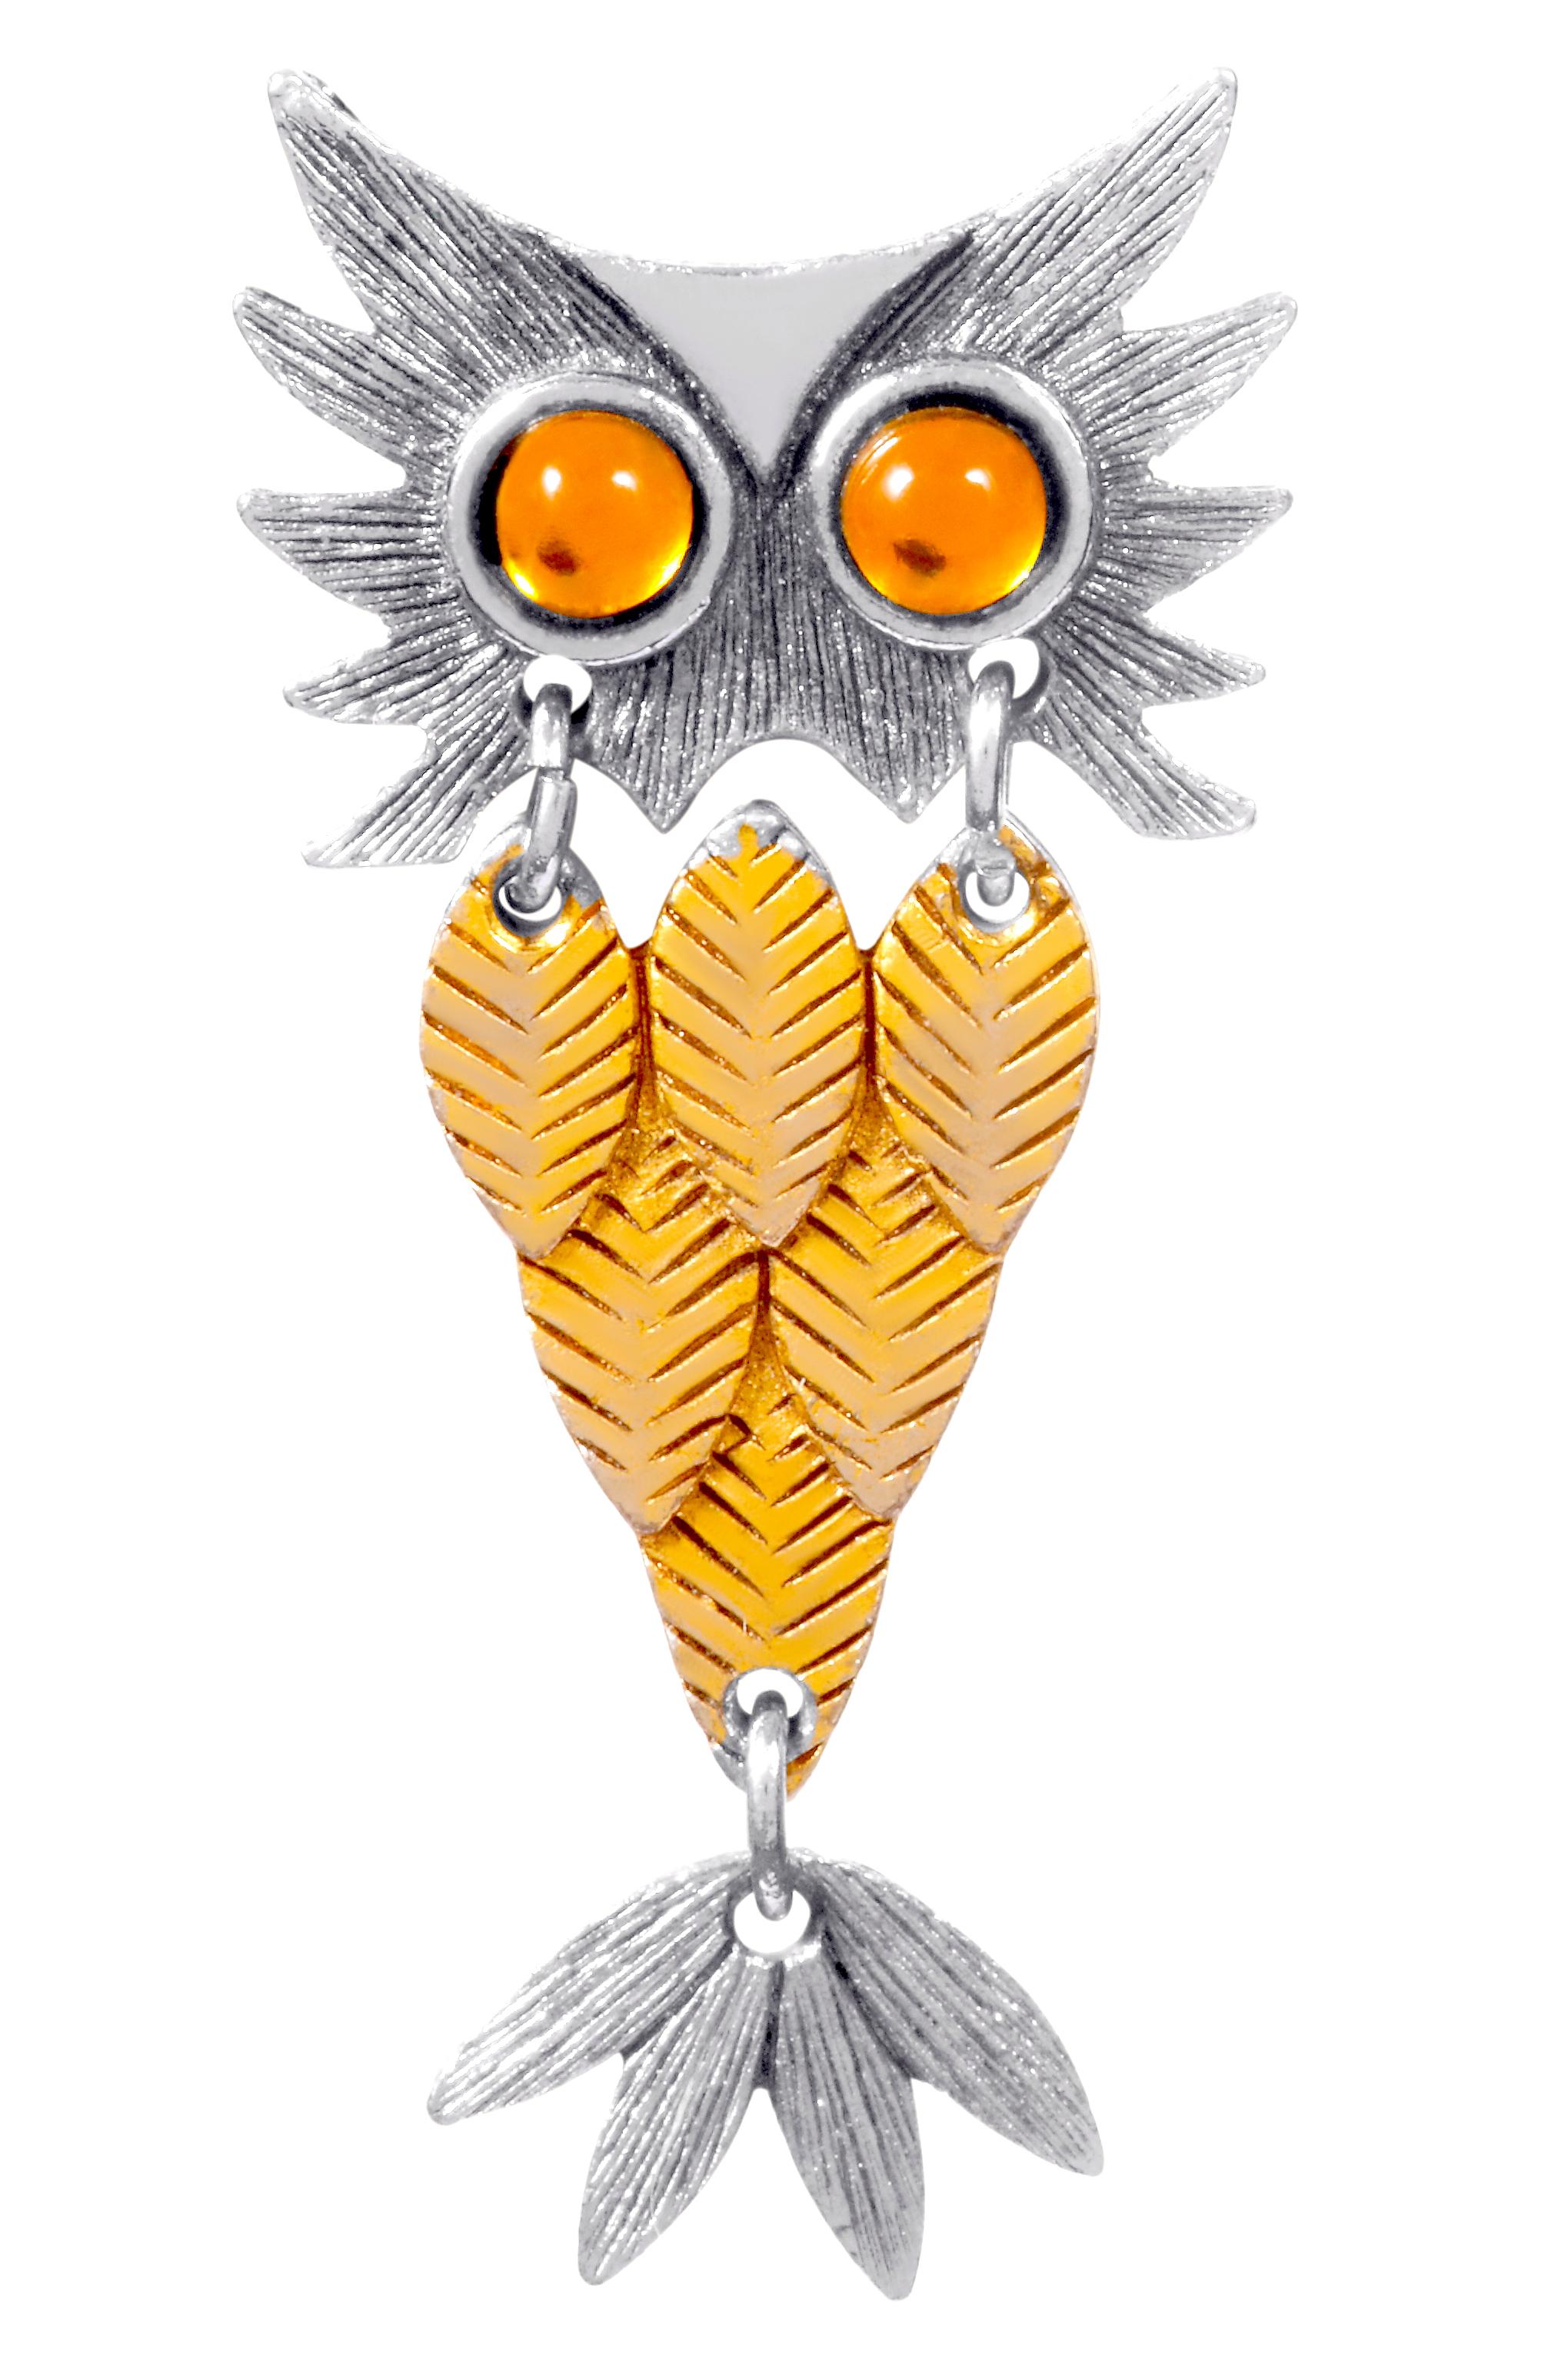 Iconic 1970s articulated owl earrings in silver and gold tone metal. The owl is designed into three sections, each held together with o-rings which give the design a fun and novelty feel.  These well functioning and comfortable clip earrings are